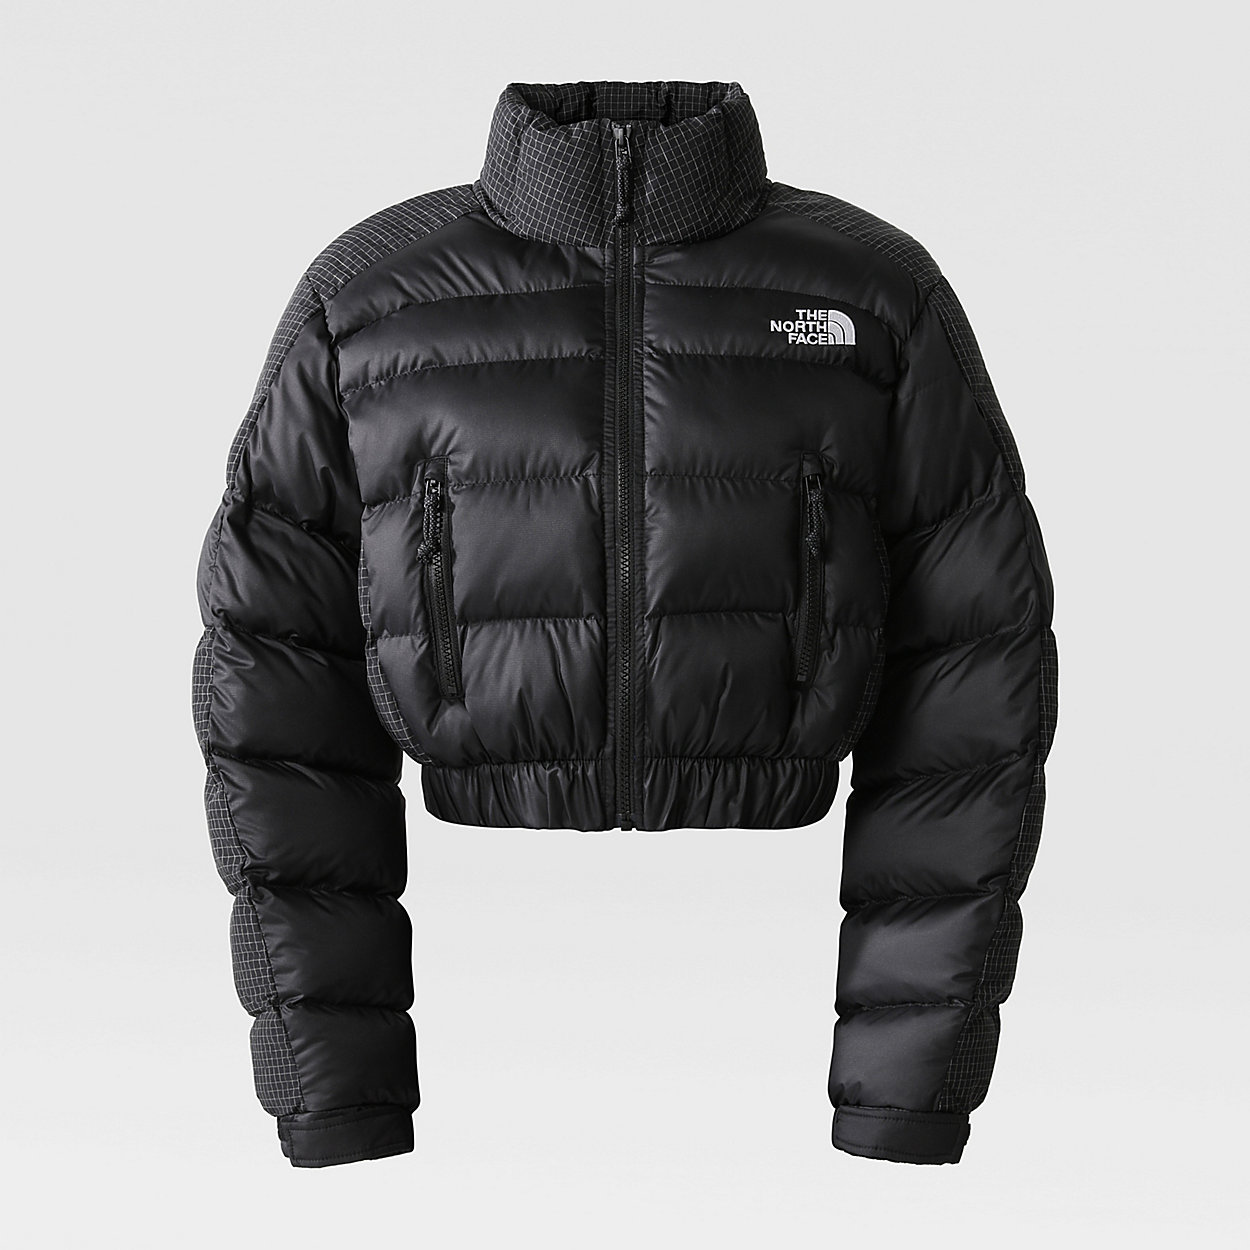 RUSTA PUFFER JACKET - The North Face